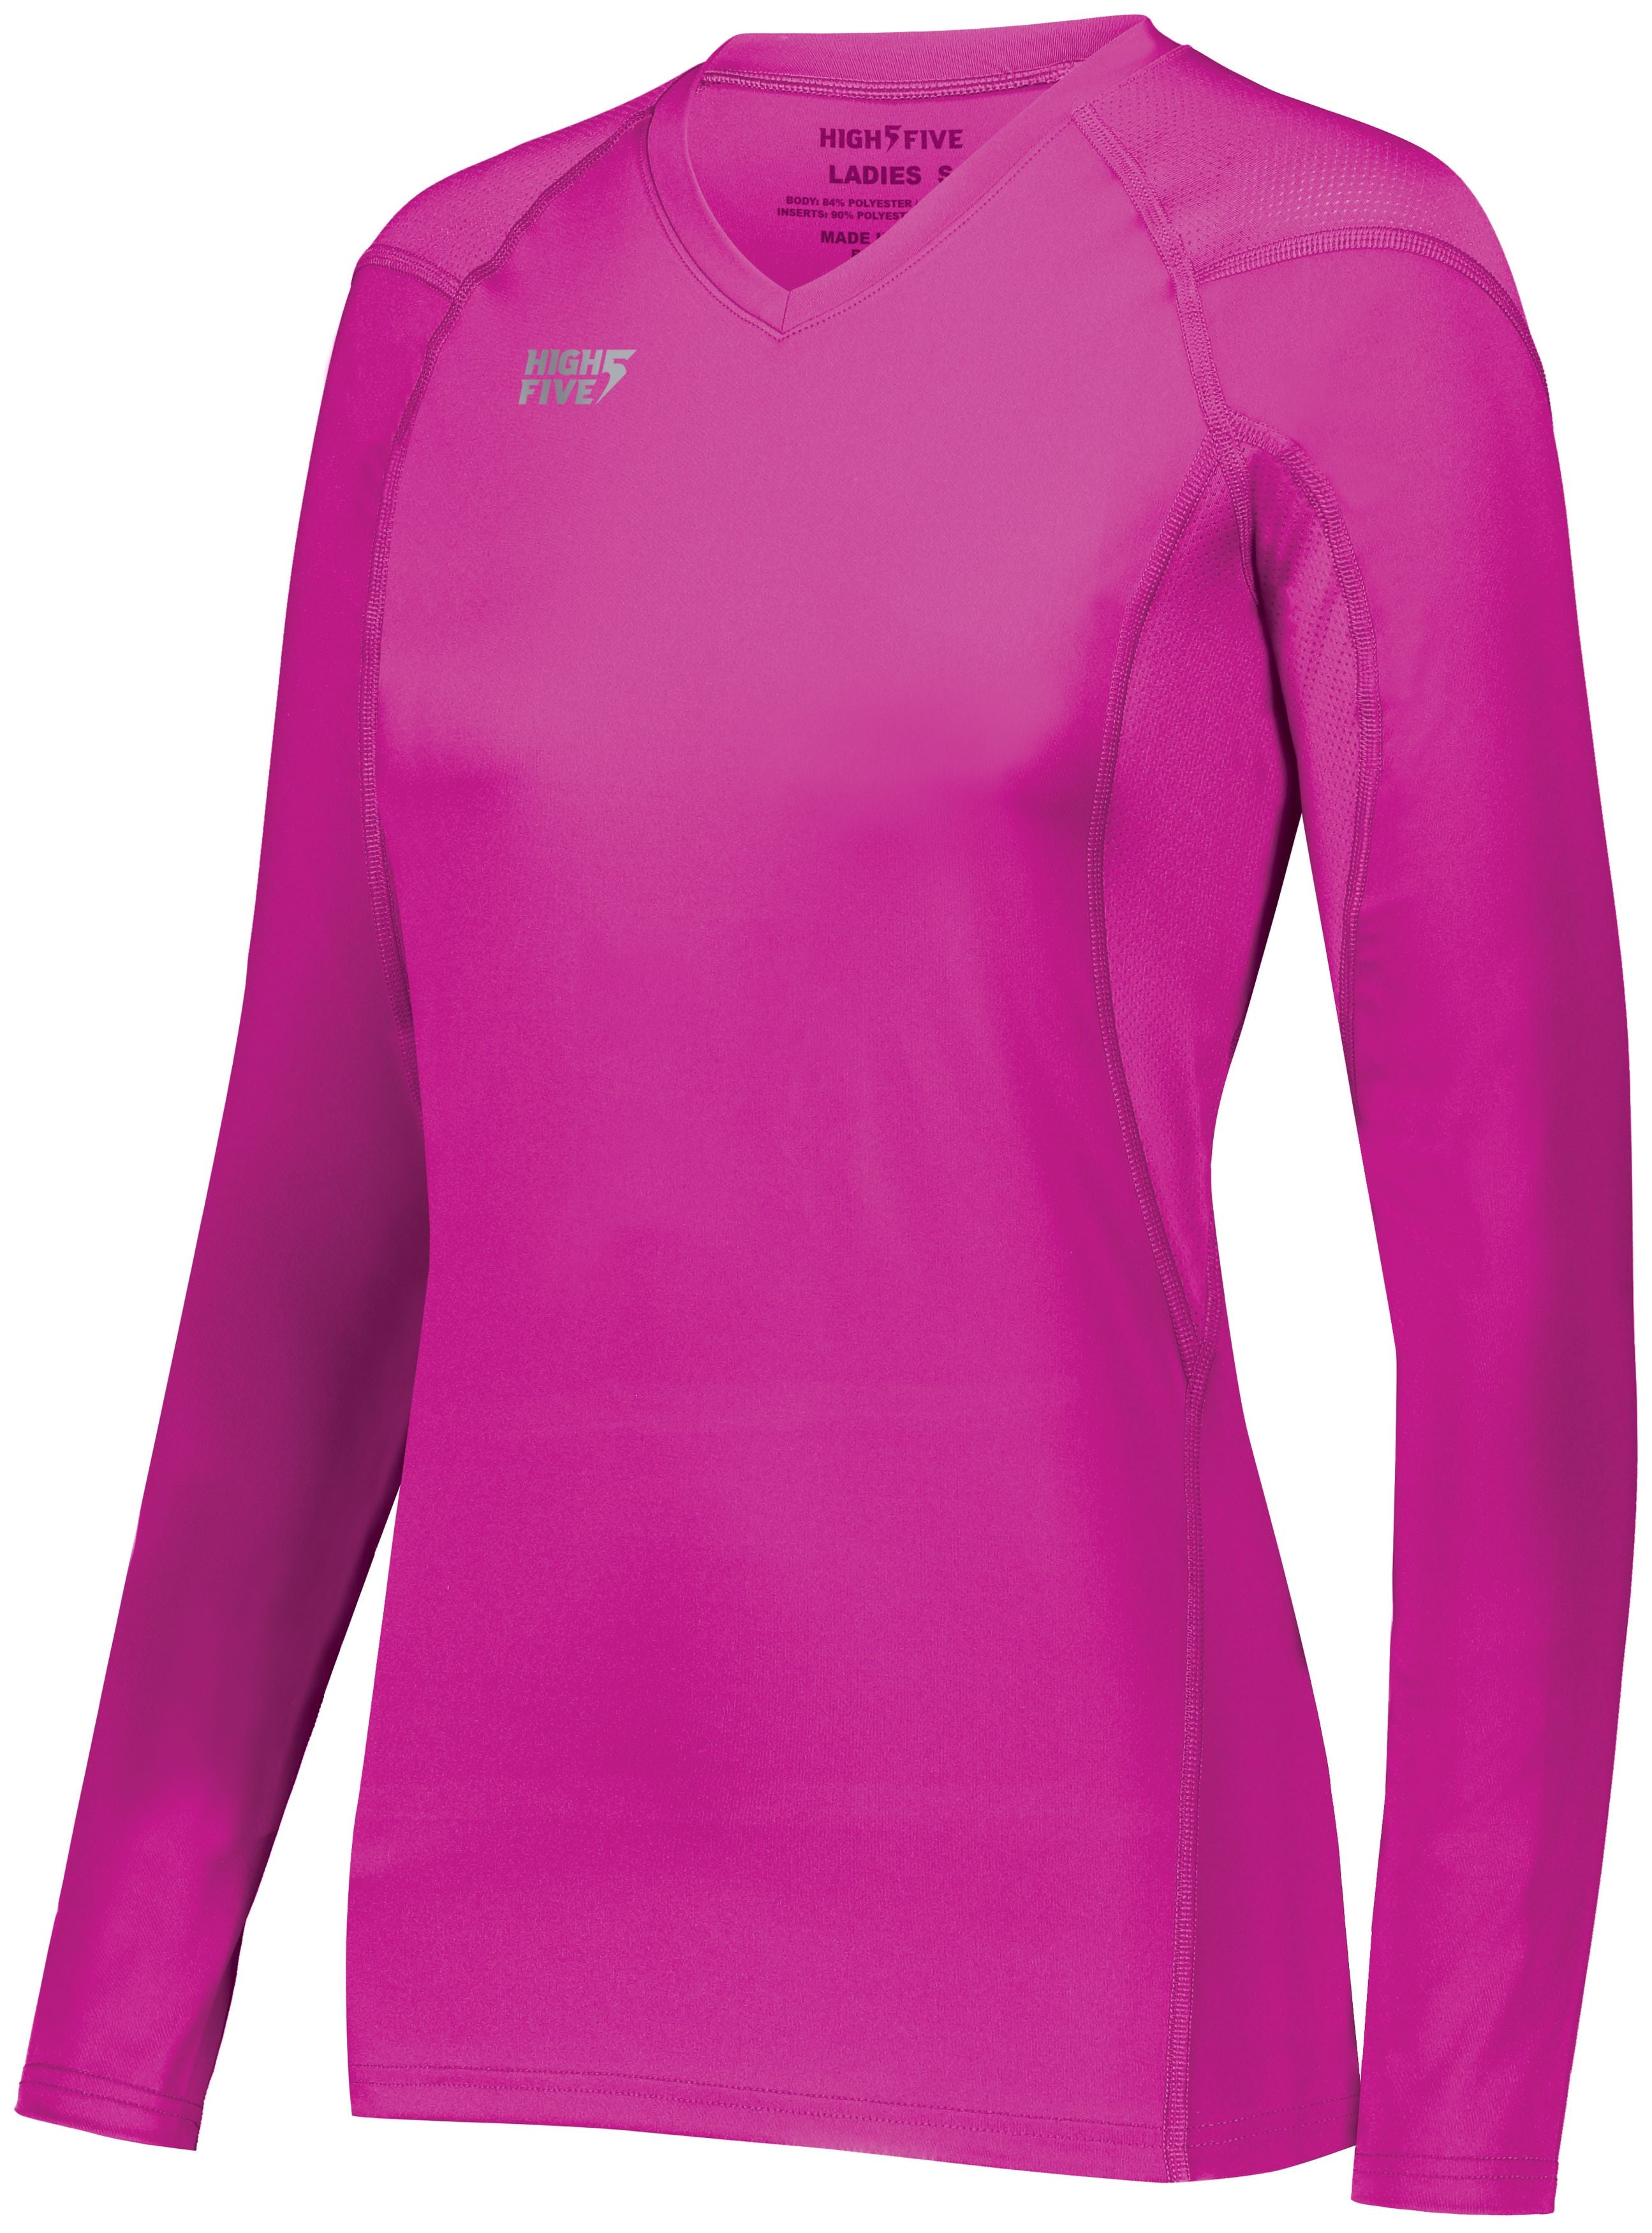 High 5 Girls Truhit Long Sleeve Jersey in Power Pink  -Part of the Girls, High5-Products, Volleyball, Girls-Jersey, Shirts product lines at KanaleyCreations.com